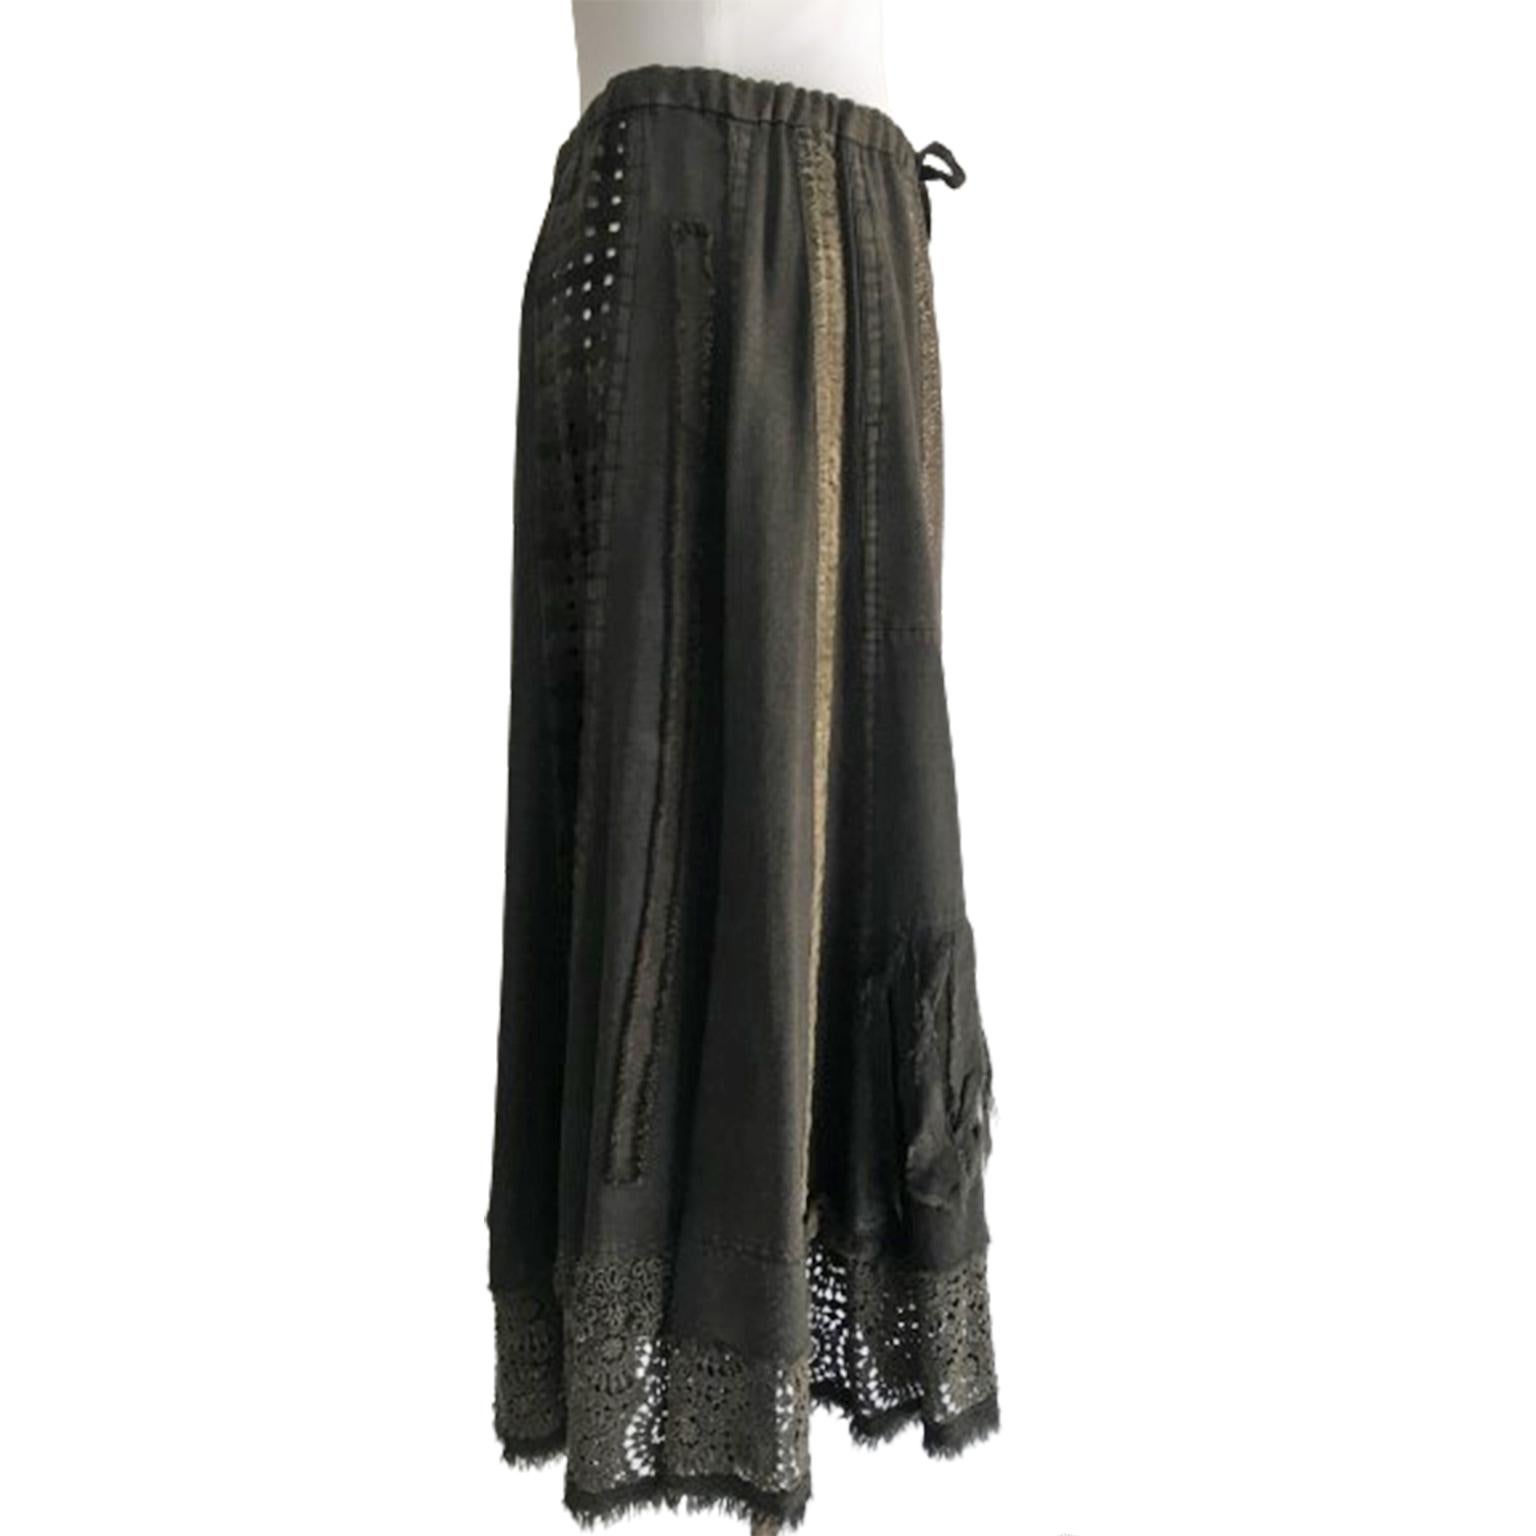 Unique Issey Miyake HaaT skirt from circa 1990s in grey earth tone thin wool. Features different materials in panels. Lace hem. Opens with one string and buttons on the front. Unlined. Incredible mix of textile. Has been worn and is in excellent